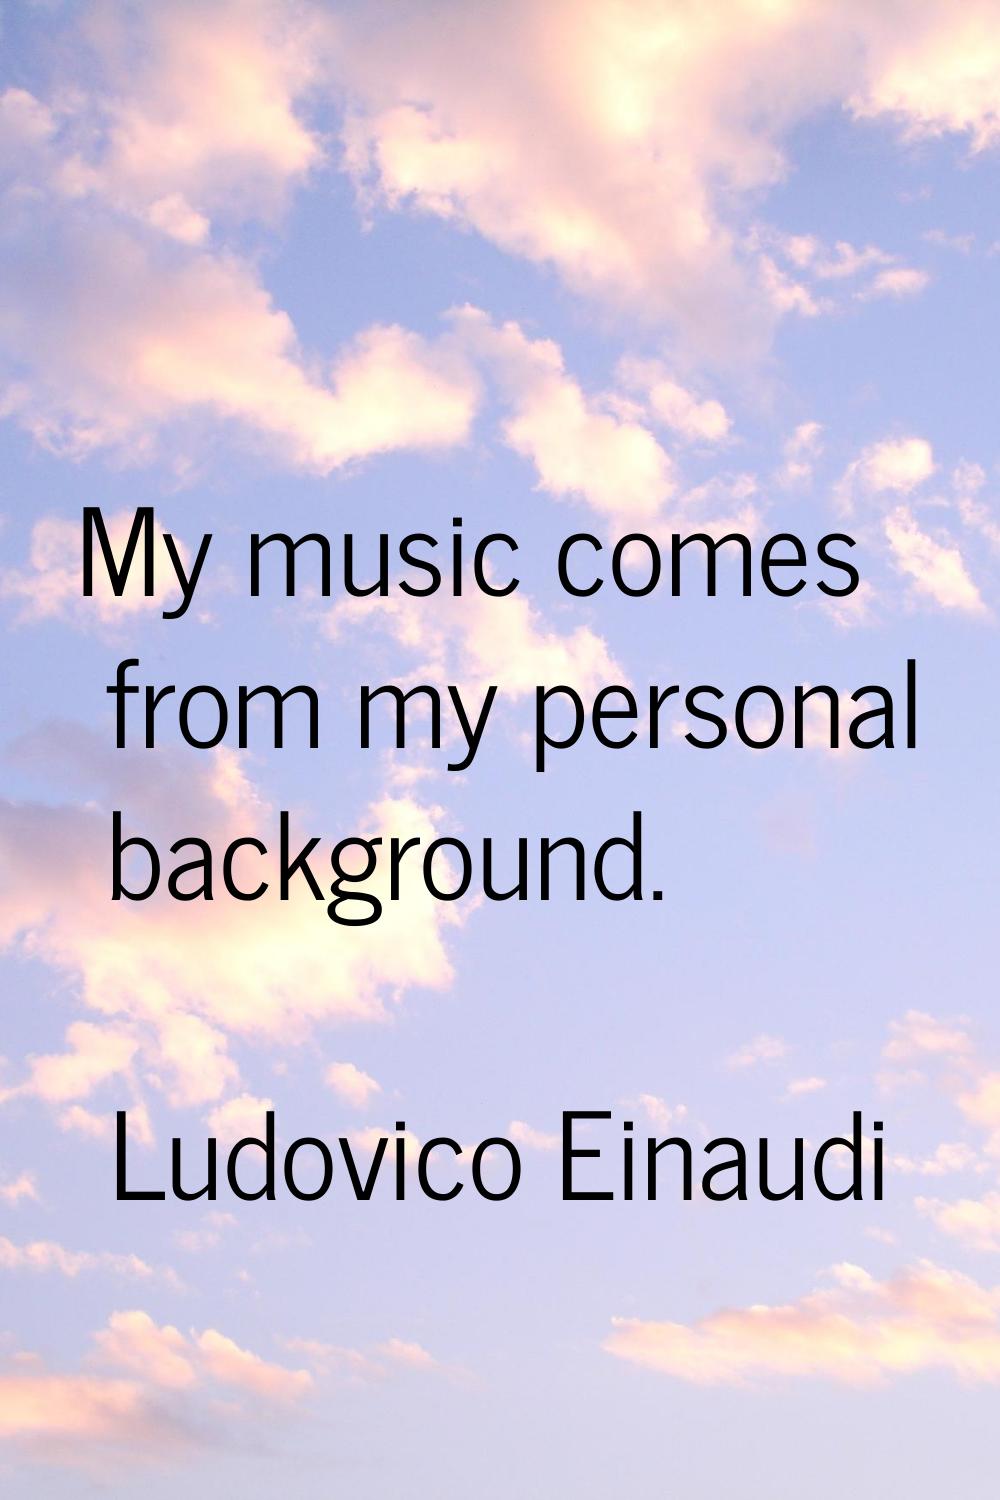 My music comes from my personal background.